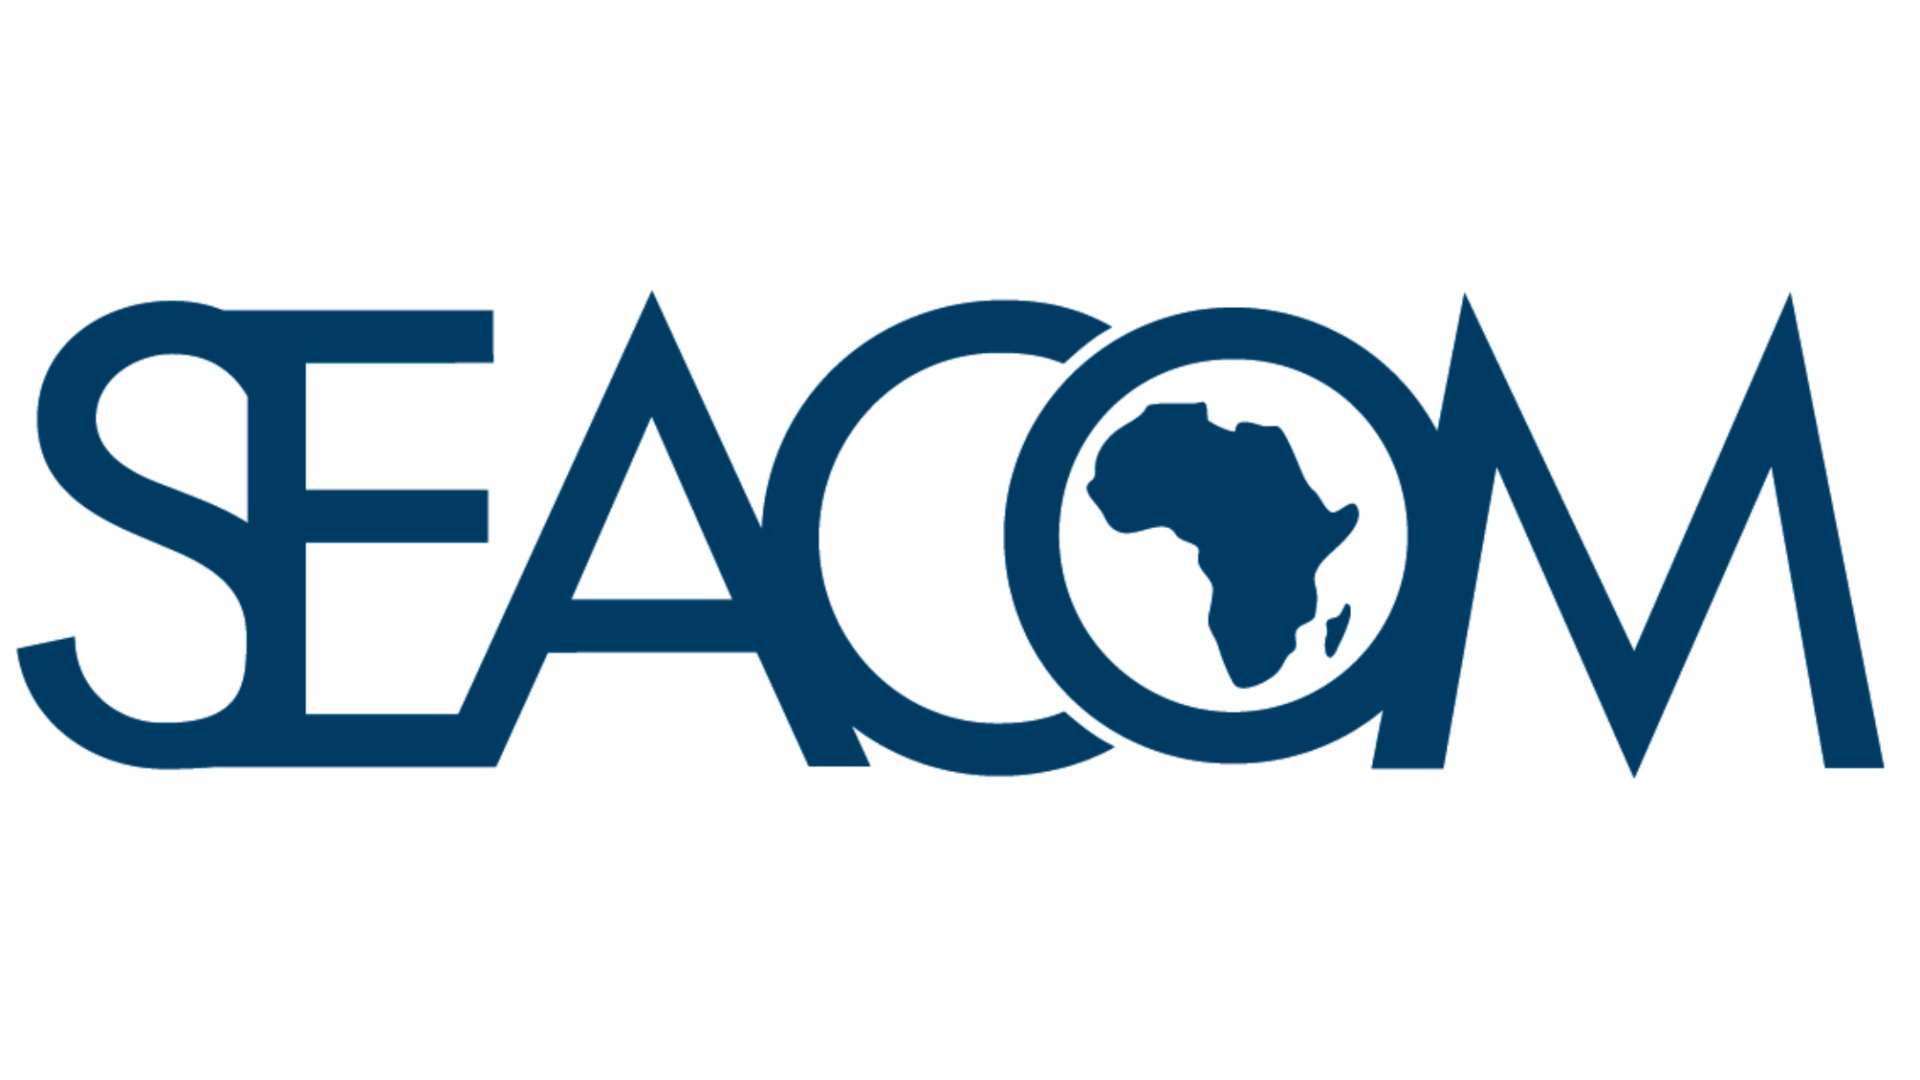 SEACOM greenlit to explore fibre opportunities in East Africa - HYPERTEXT